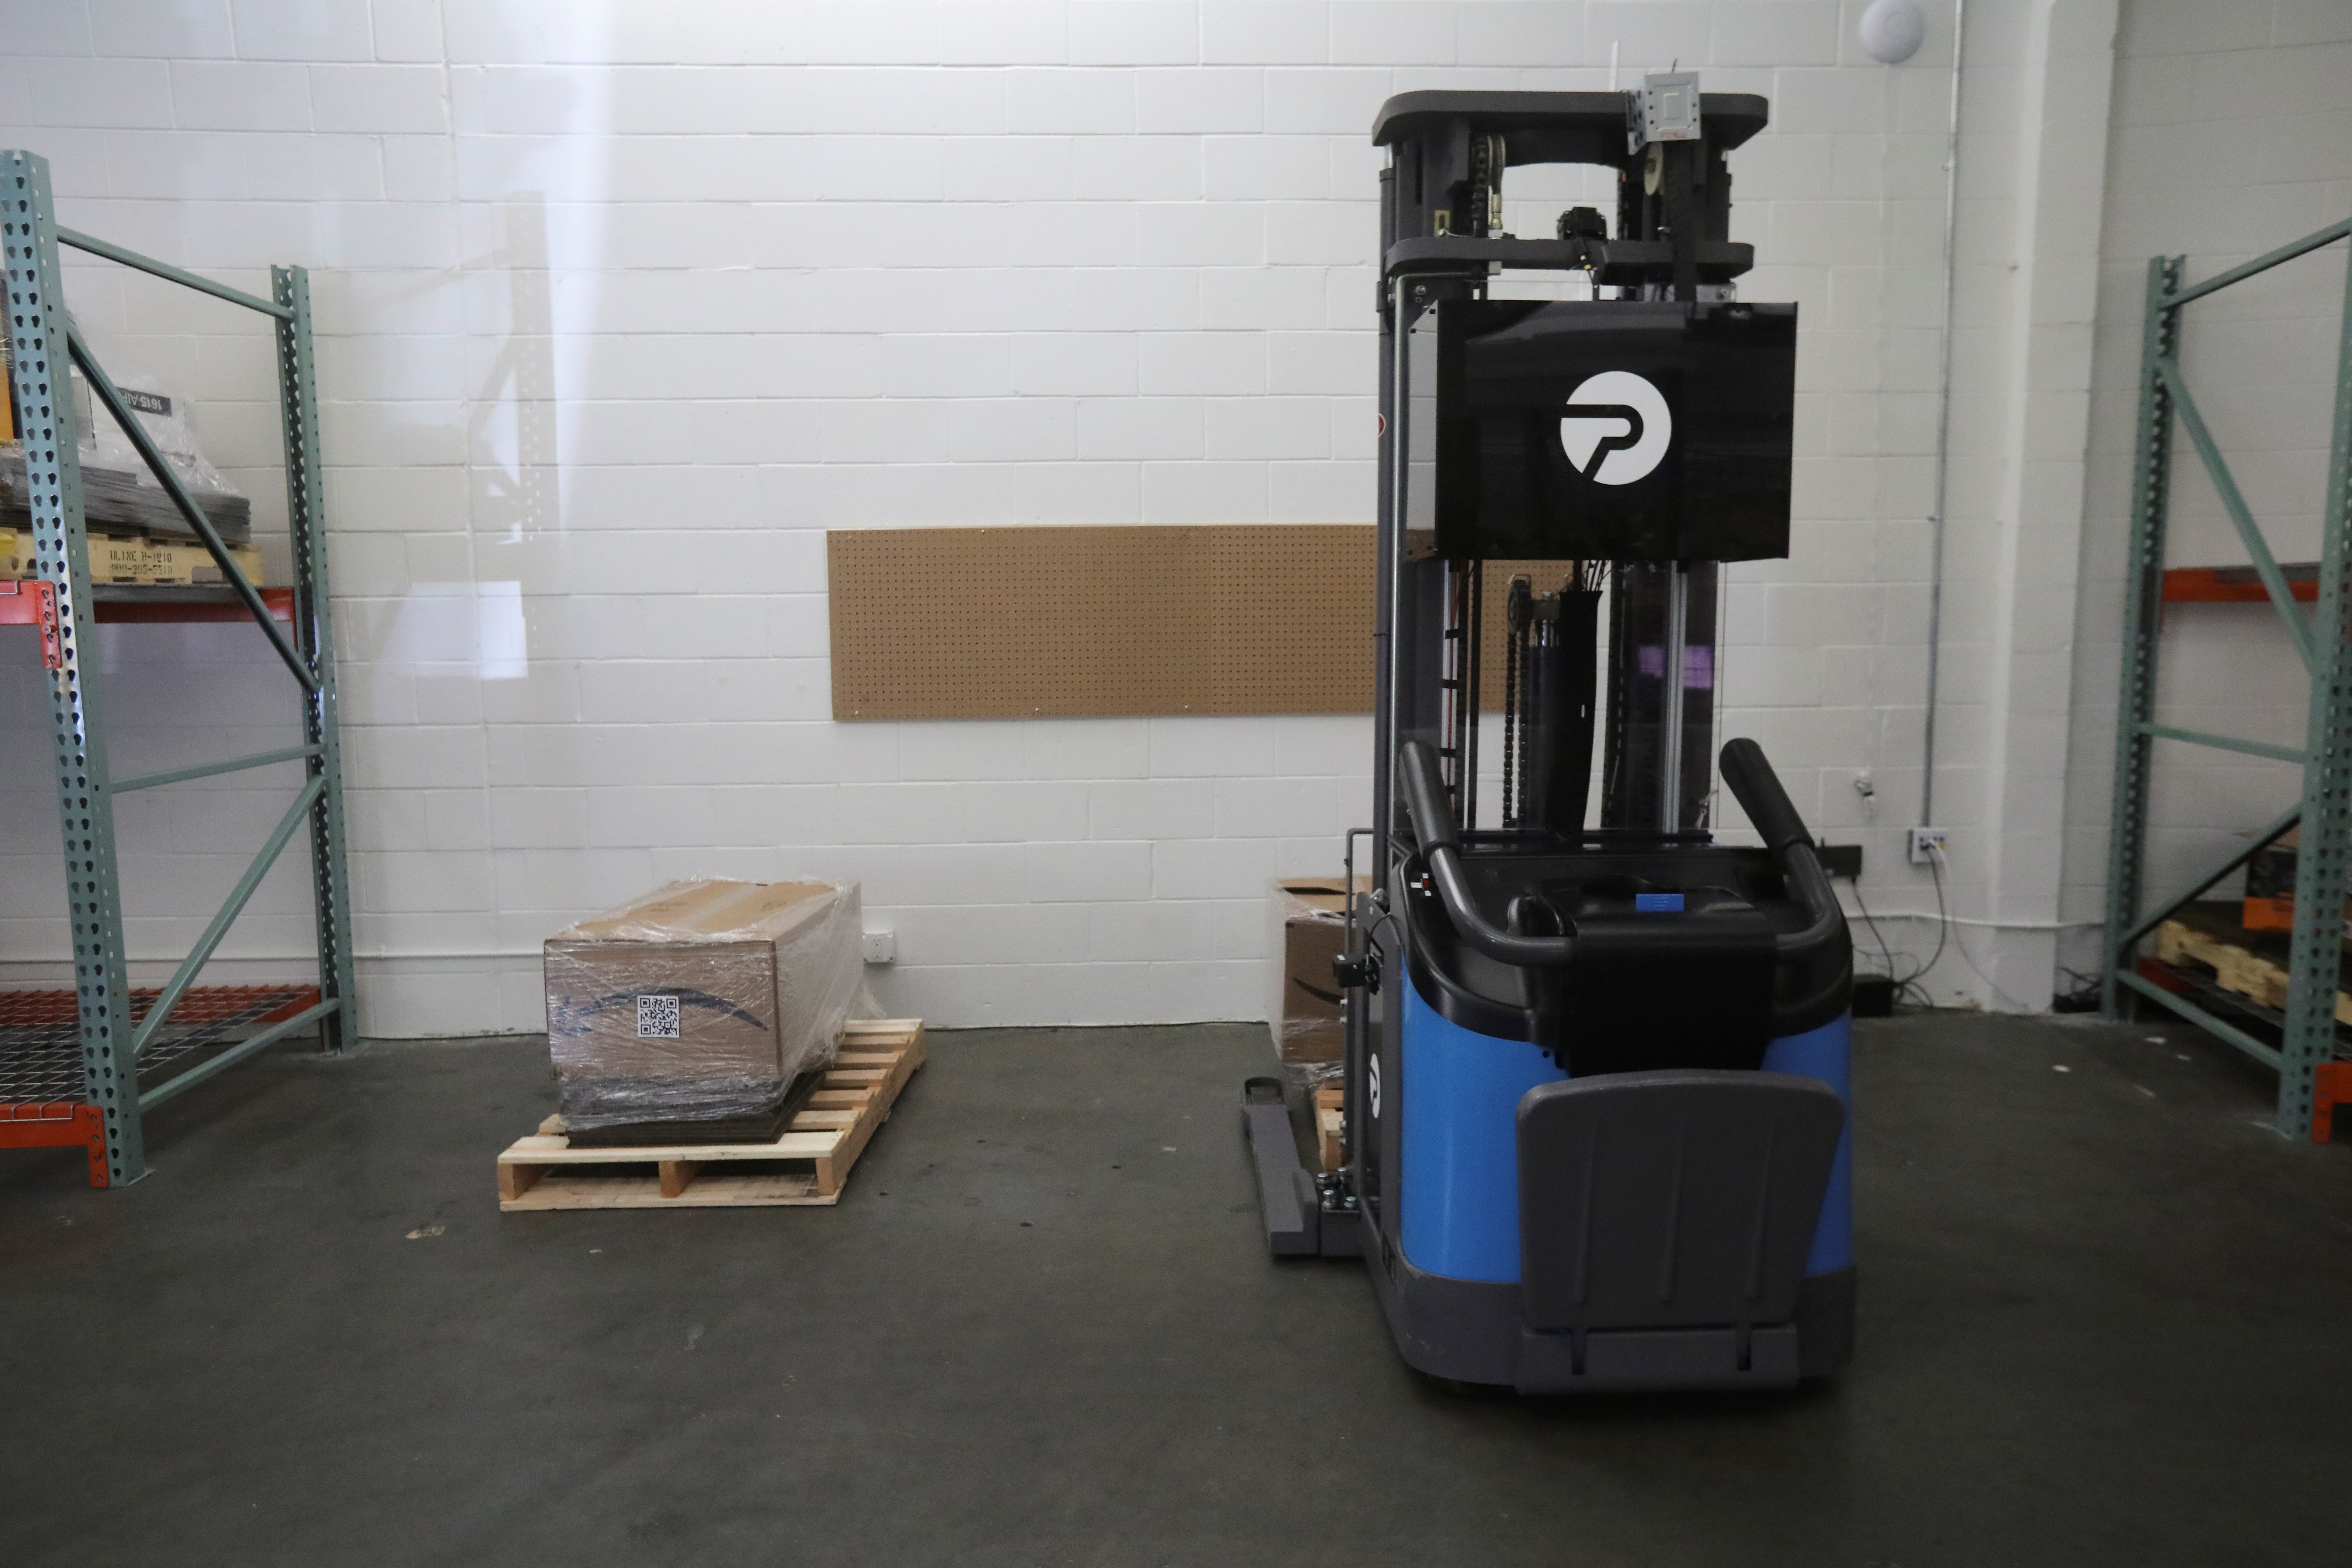 A forklift controlled by a remote operator moves in a warehouse in a demonstration by Phantom Auto in Mountain View